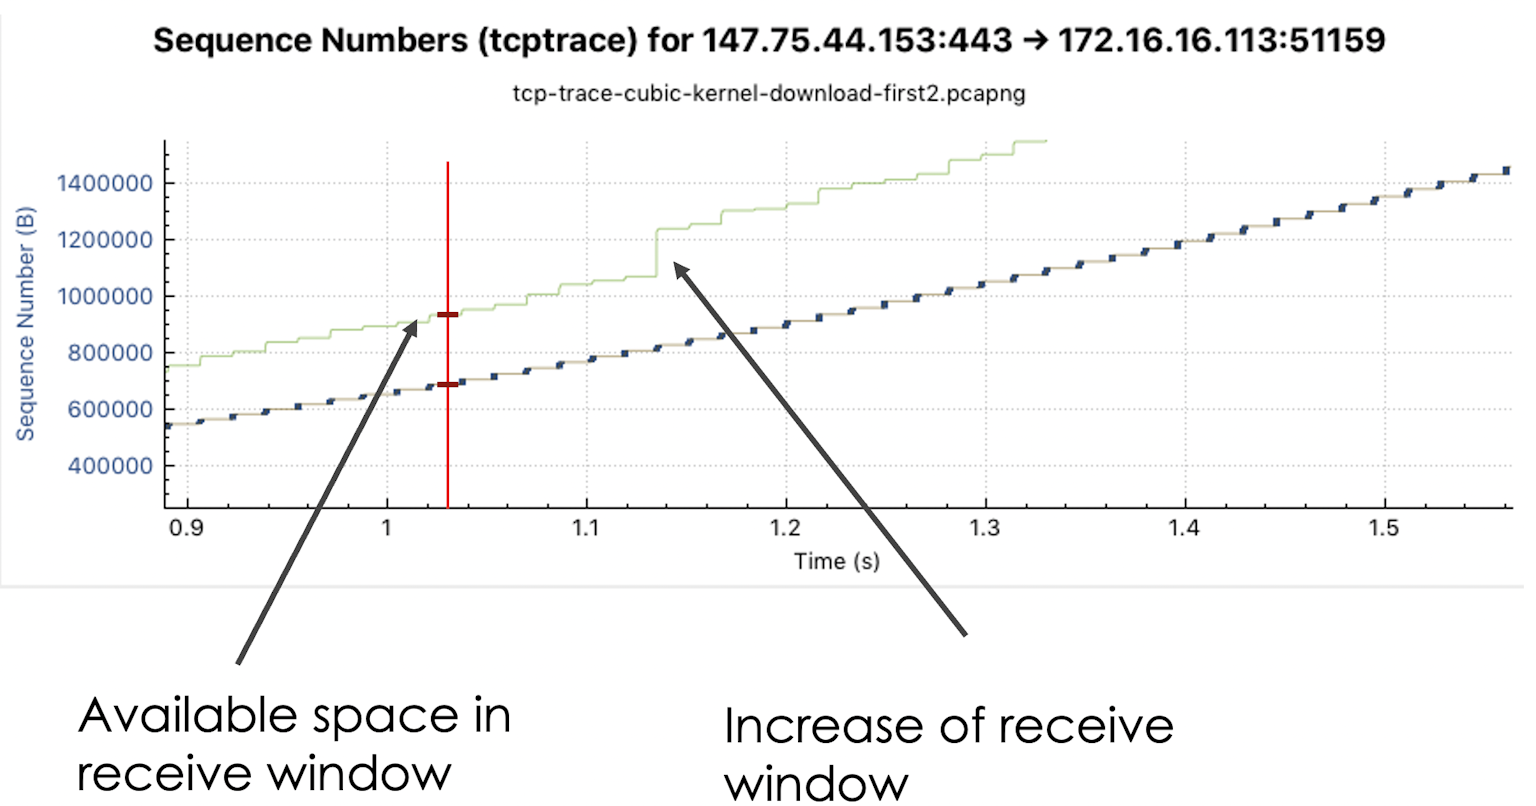 TCP Sequence Increase of Receive Window Size